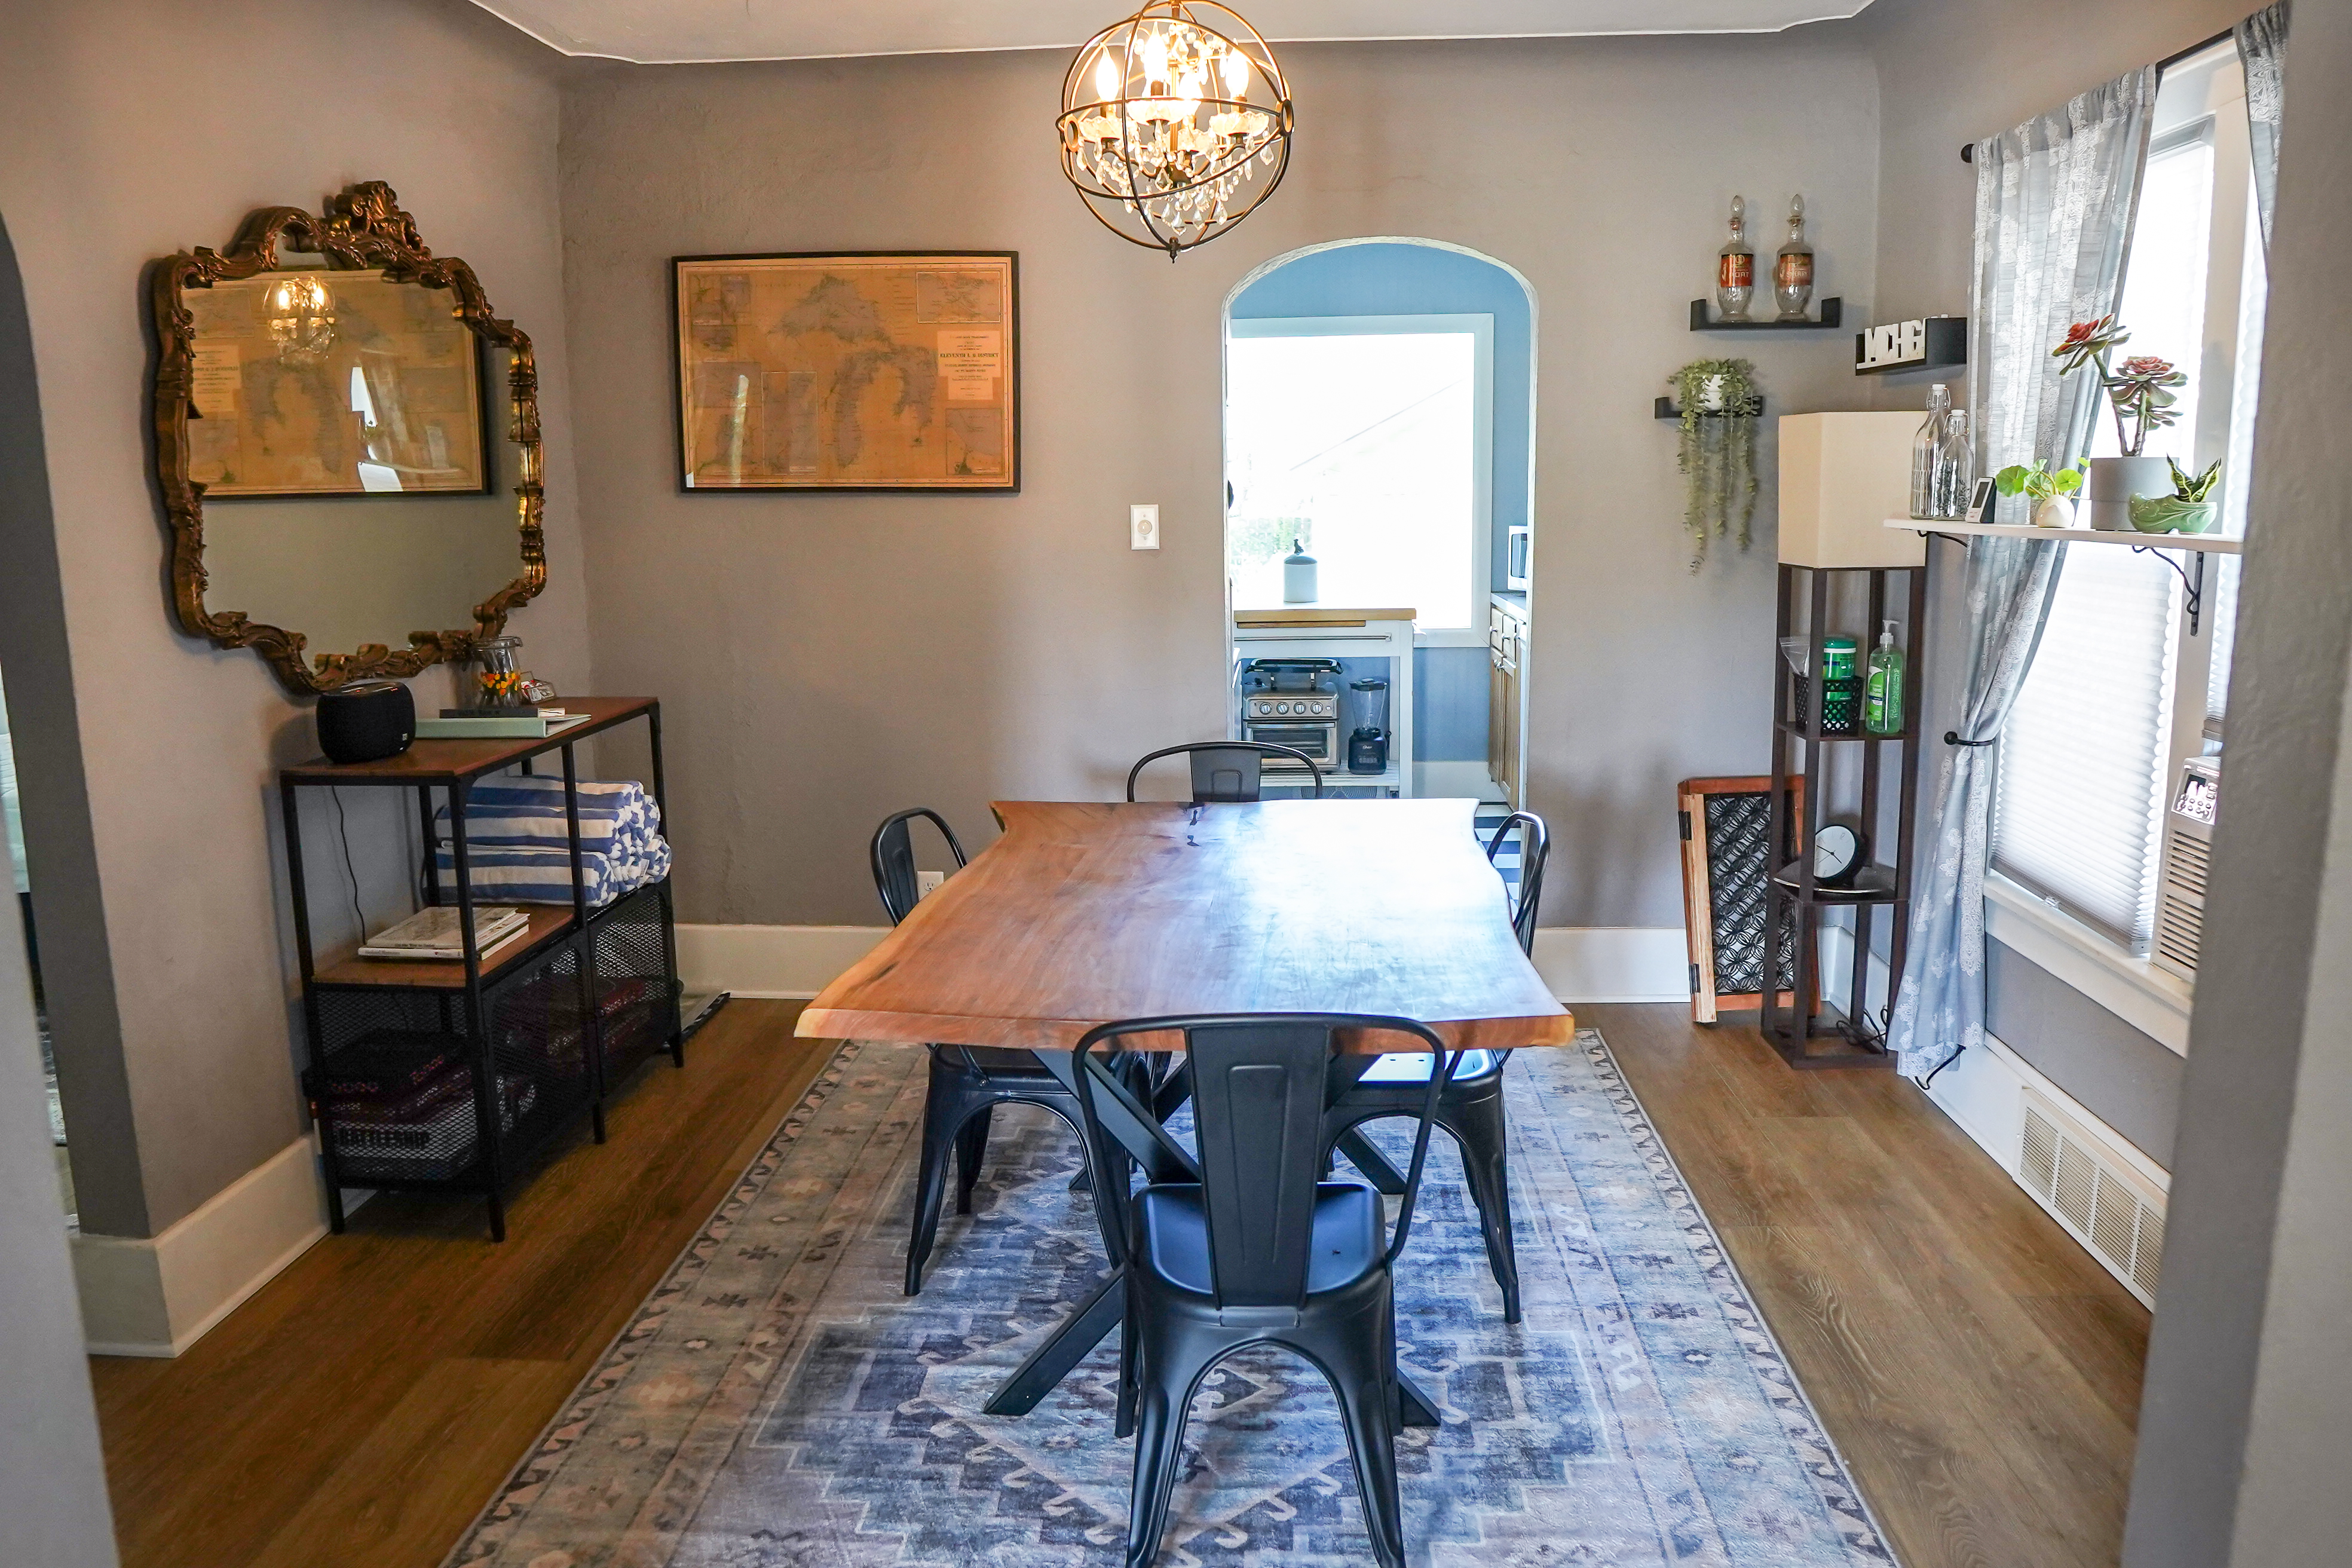 Featuring a delightful dining room flanked by the clean kitchen and comfy living room.